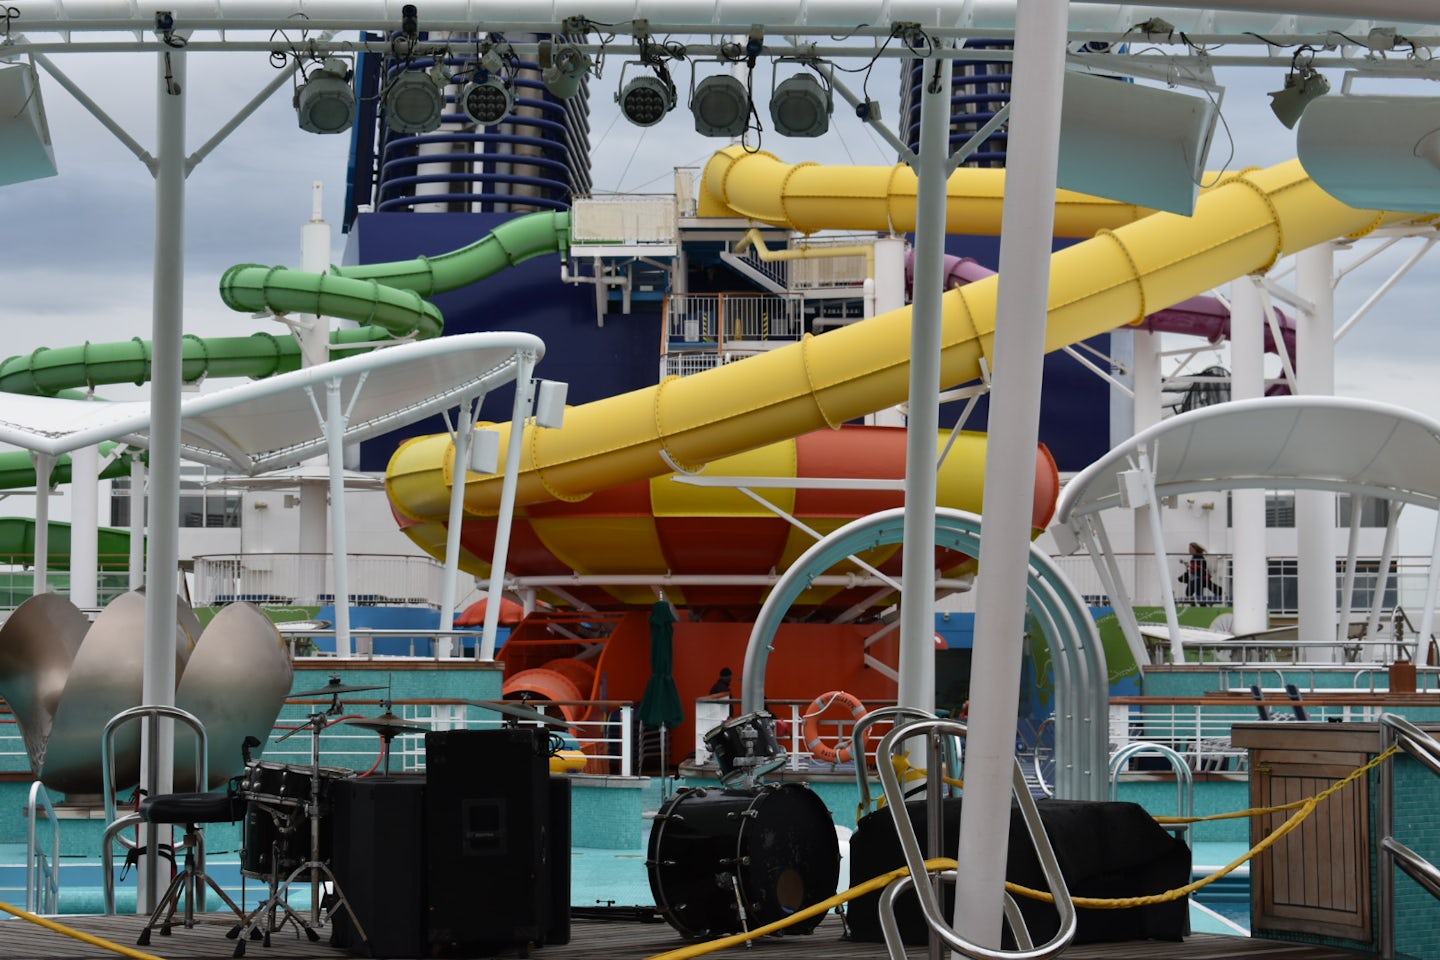 We checked out the slides personally inside of going into port at Grand Cay